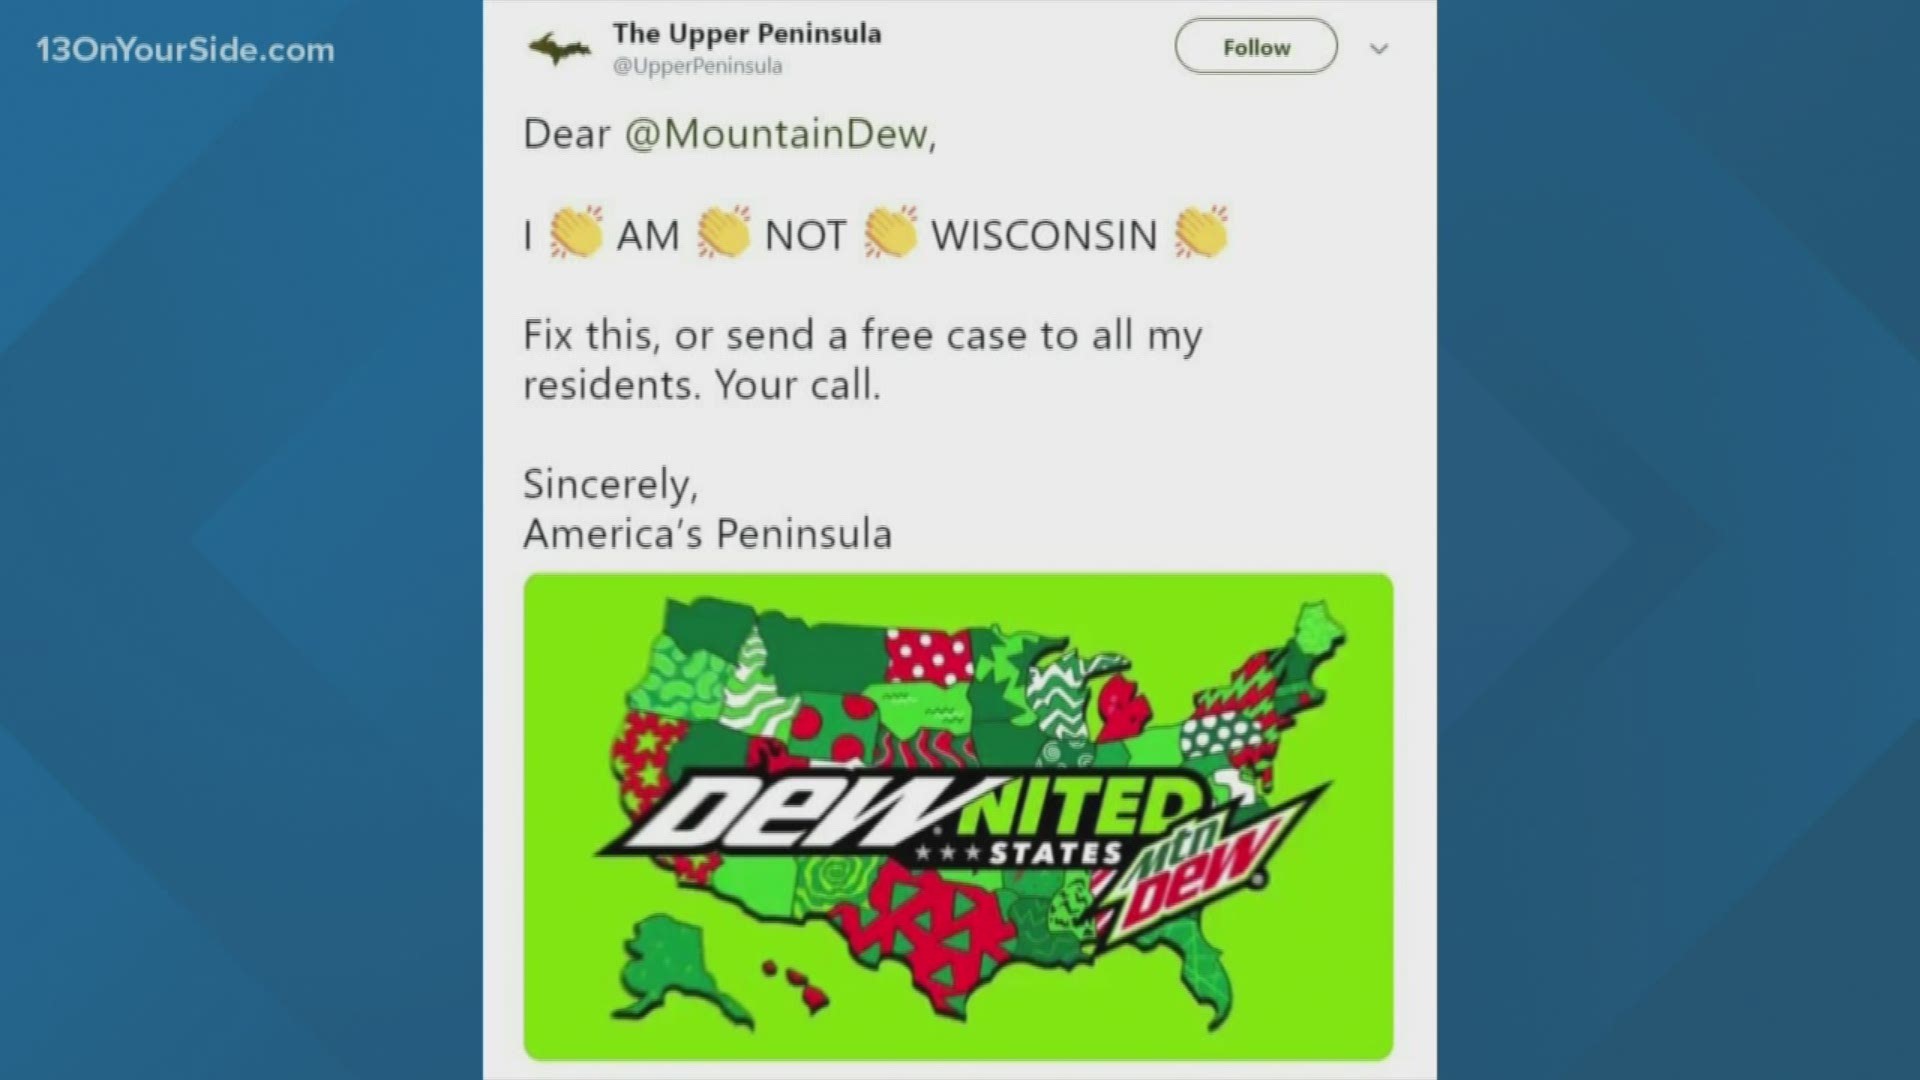 Mountain Dew doesn't know where Michigan is